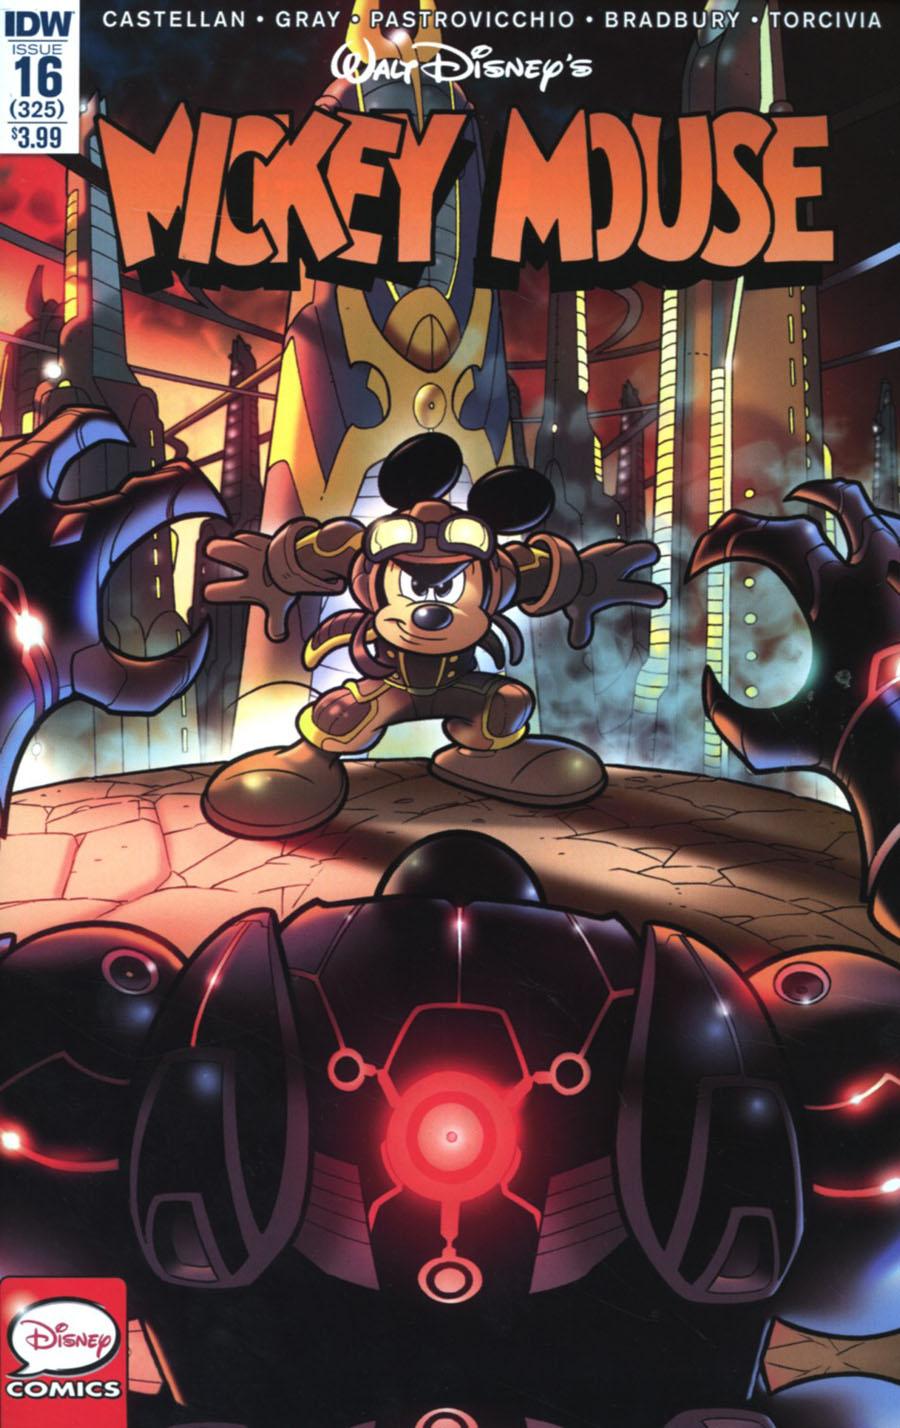 Mickey Mouse Vol. 2 #16